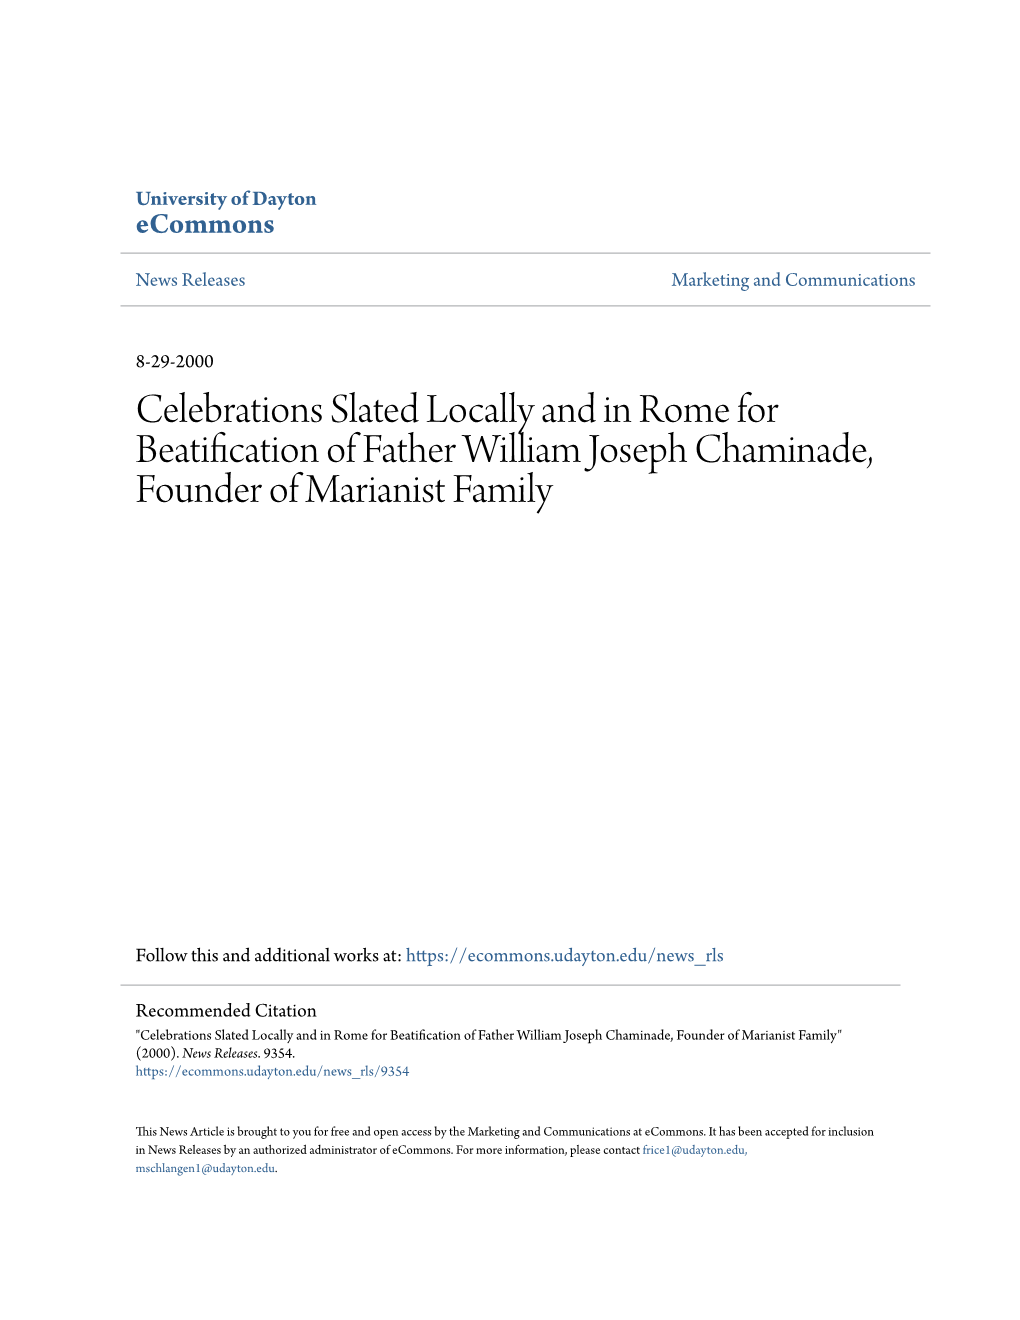 Celebrations Slated Locally and in Rome for Beatification of Father William Joseph Chaminade, Founder of Marianist Family